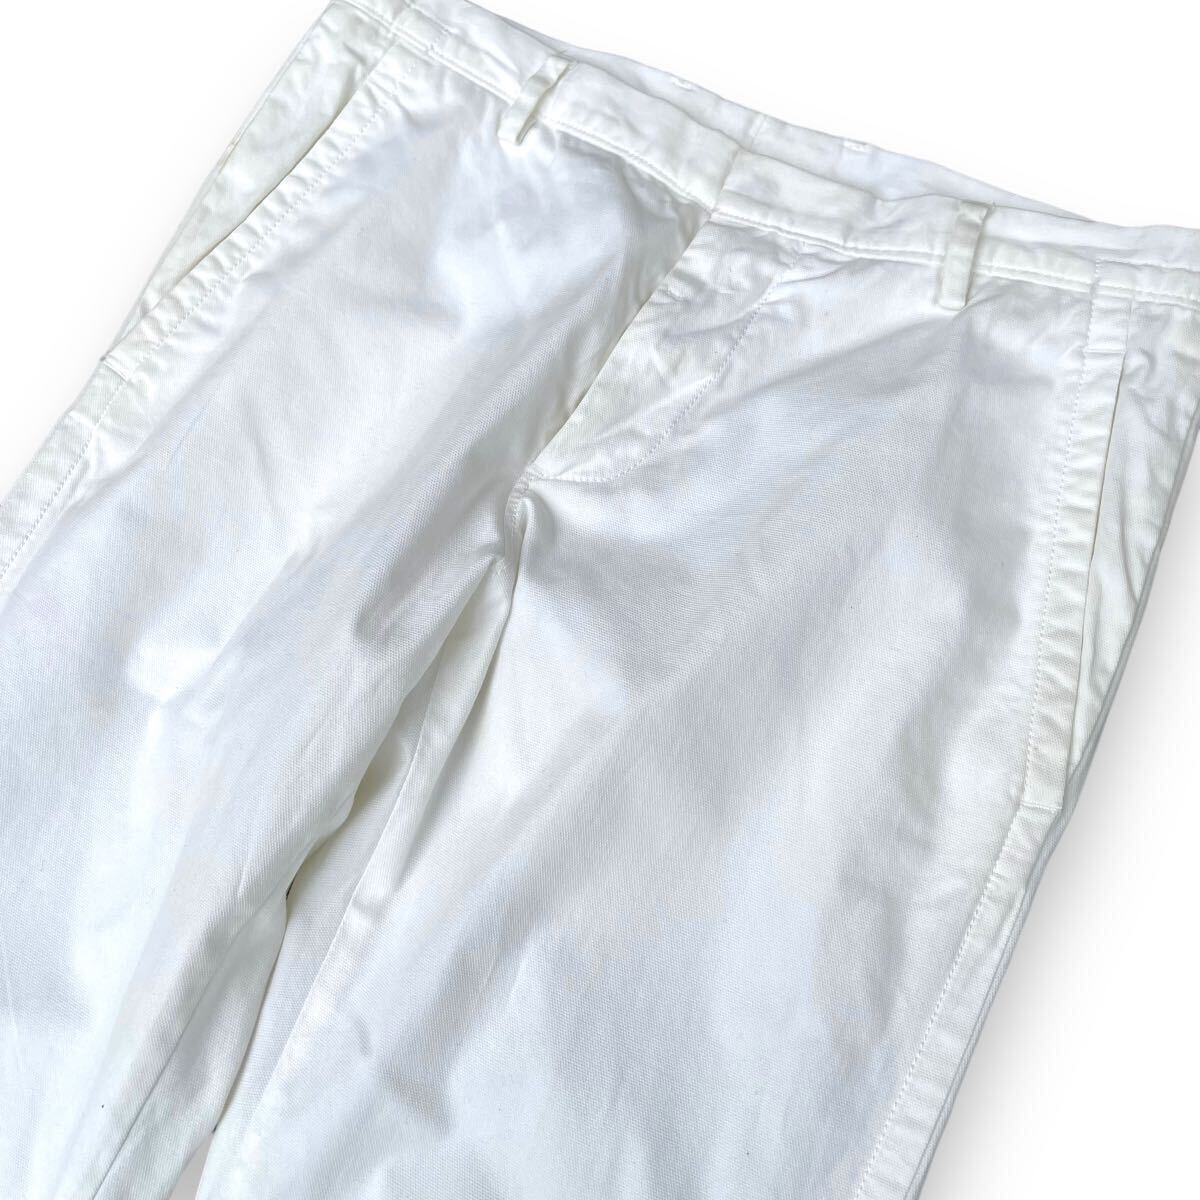 2010ss jil sander by Raf simons white slacks pants collection rare archive Italy の画像2